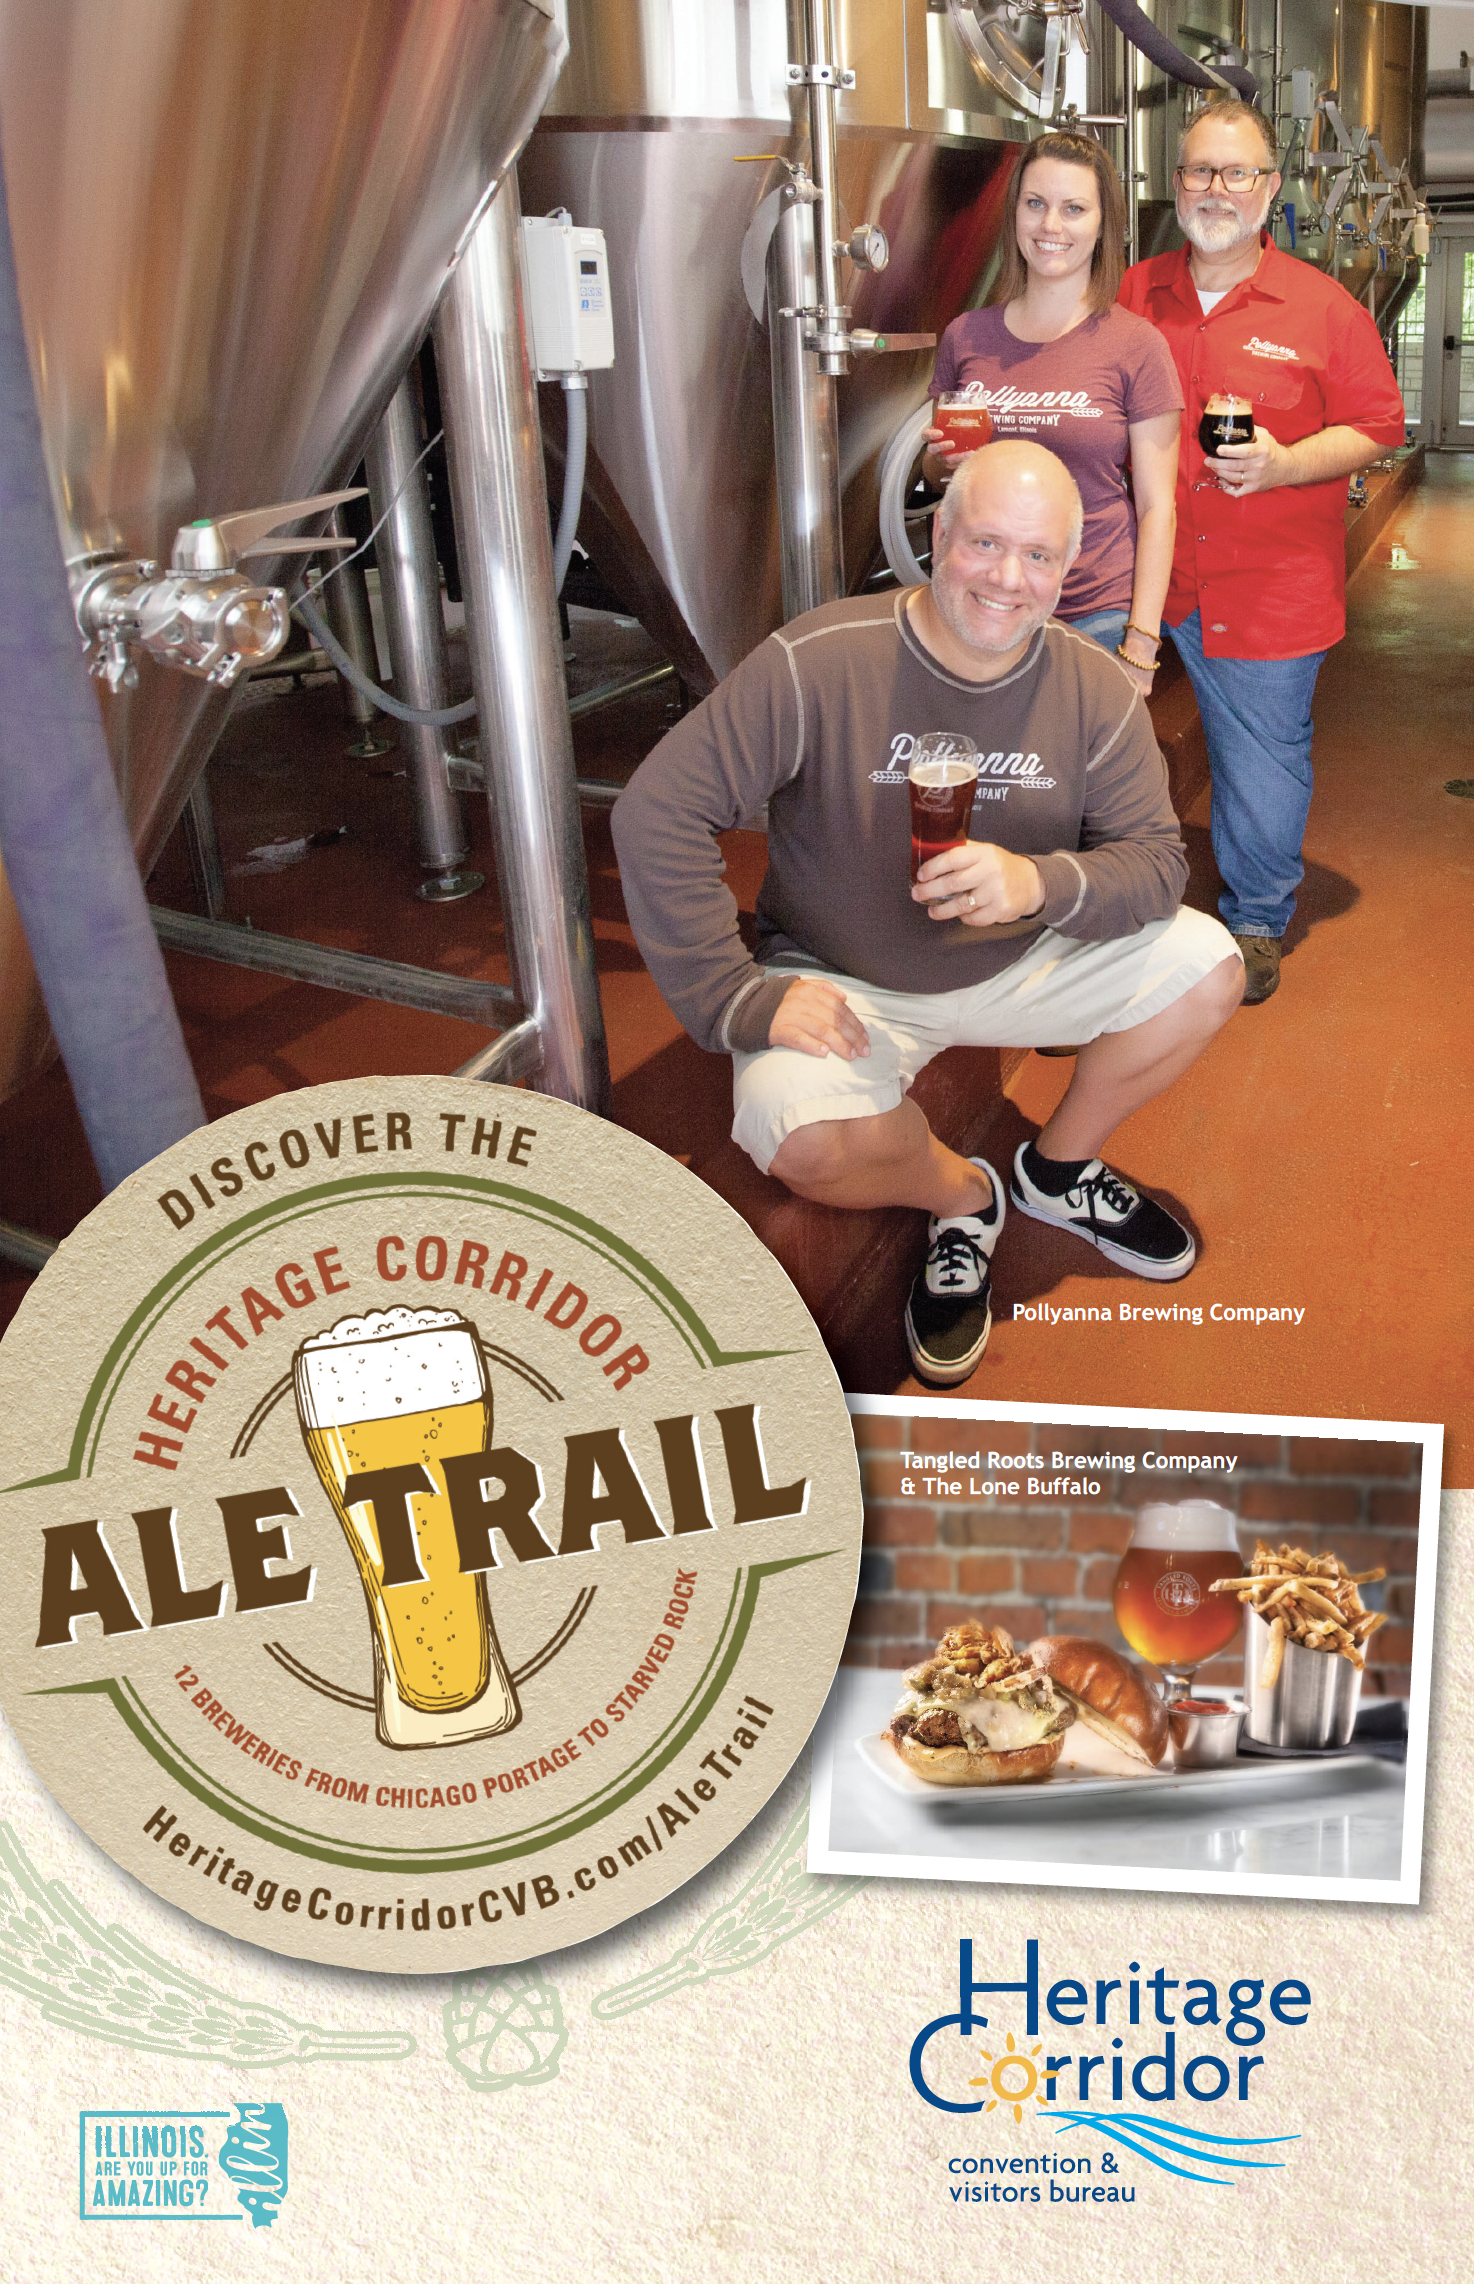 Advertising for the Ale Trail, featuring Pollyanna Brewing Company and Tangled Roots Brewing Company